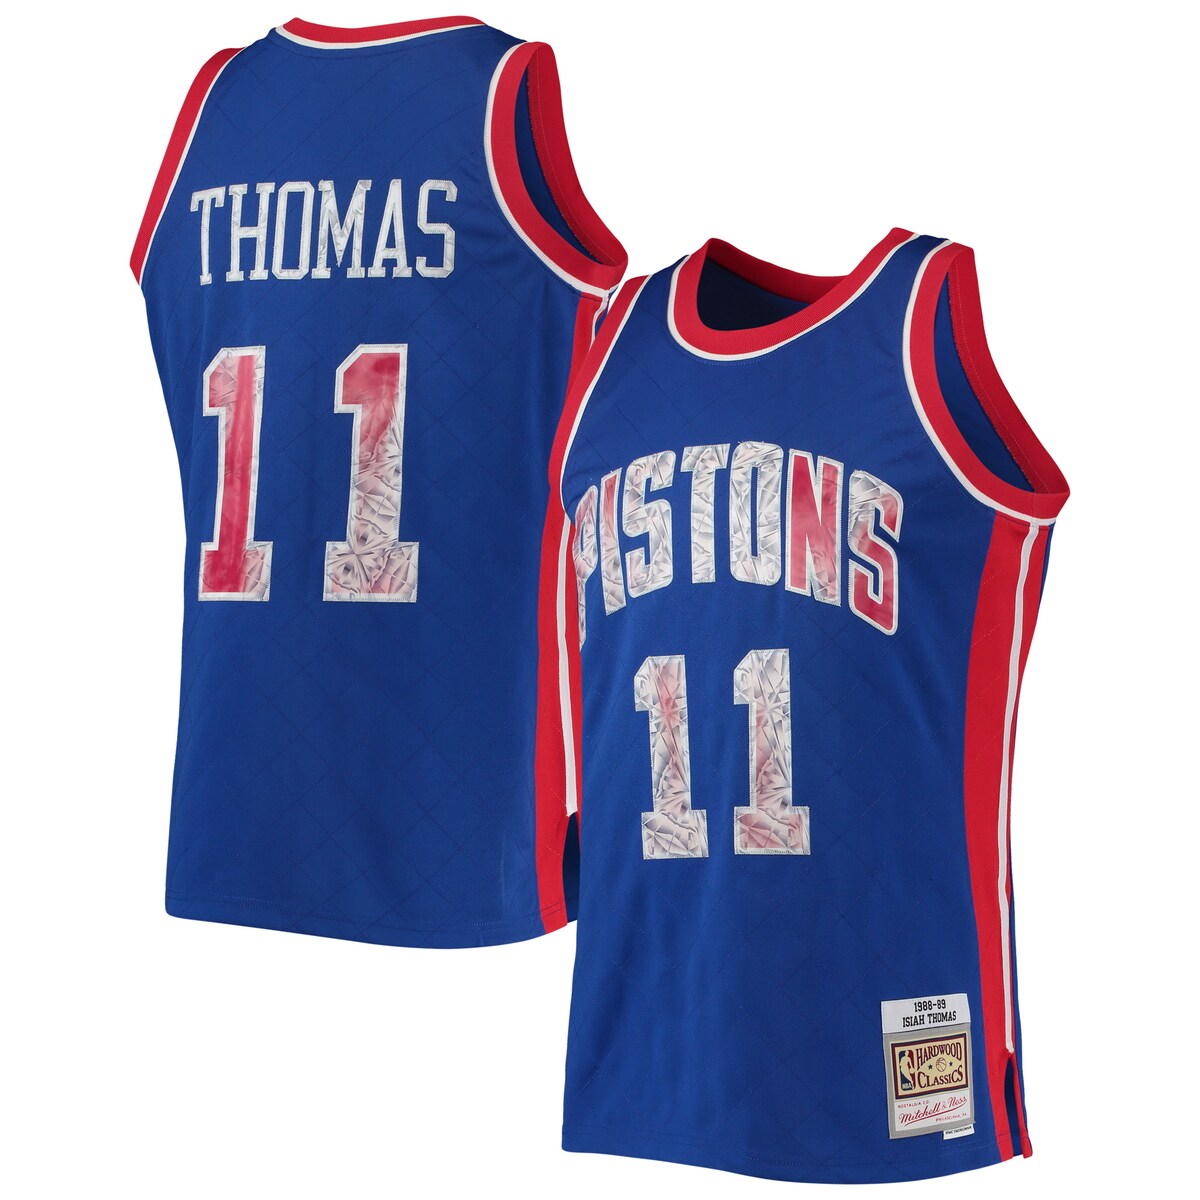 For the NBA's 75th anniversary, throw it back to one of the stars of the Detroit Pistons with this Isiah Thomas Hardwood Classics Diamond Swingman jersey from Mitchell & Ness. It features faux diamond details for the league's big milestone and that old-school design Isiah Thomas used to wear back in the day. This authentic piece of gear is a great way to mesh past and present as you get fired up for game day.Stitched designOfficially licensedSwingman ThrowbackMachine wash, line dryImportedStitched holographic applique with faux diamond patternBrand: Mitchell & NessMaterial: 100% PolyesterWoven jock tag at hemStraight hemline with side splitsSleeveless